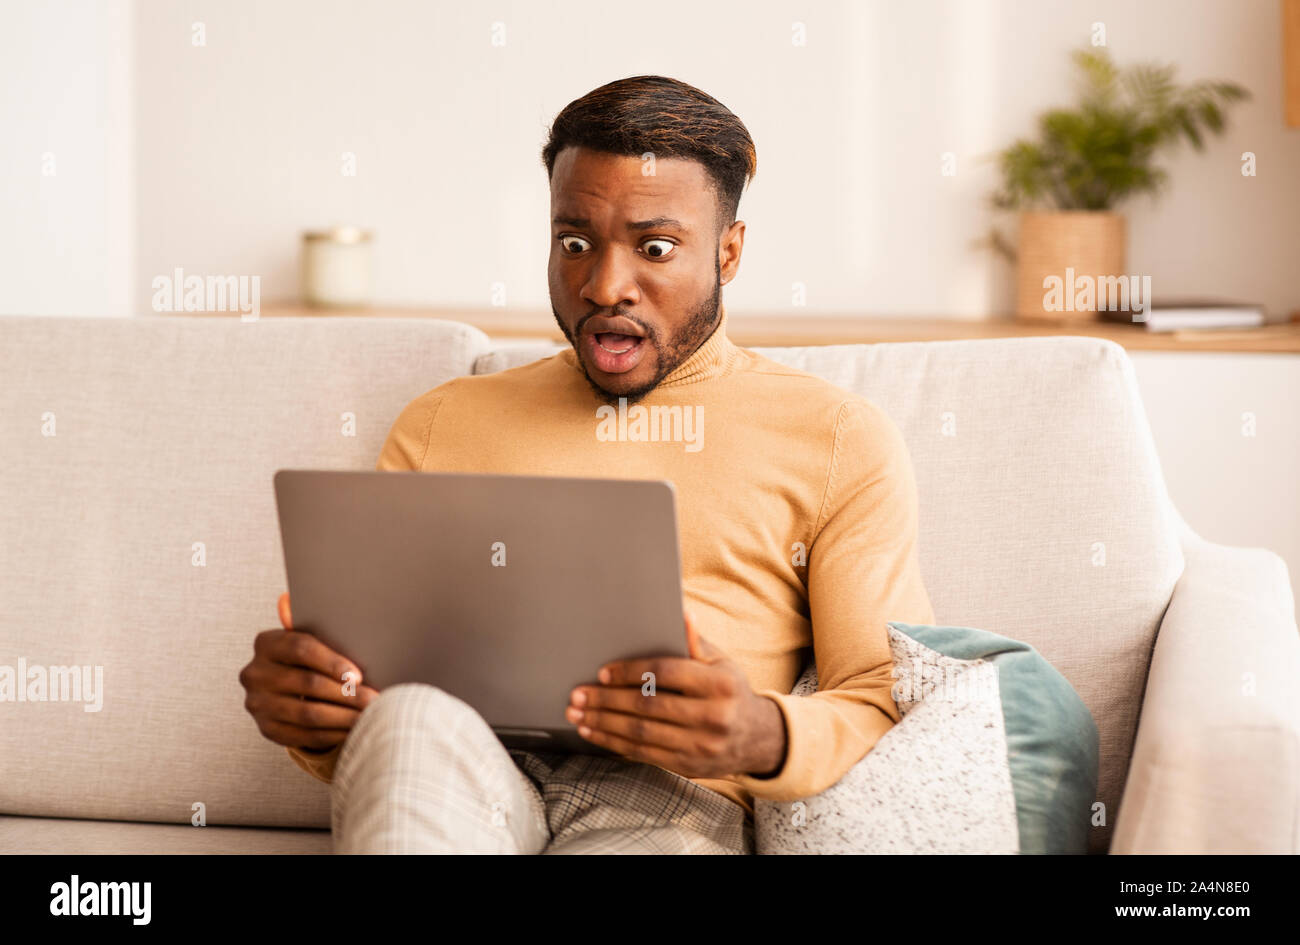 shocked-black-guy-looking-at-laptop-working-at-home-2A4N8E0.jpg